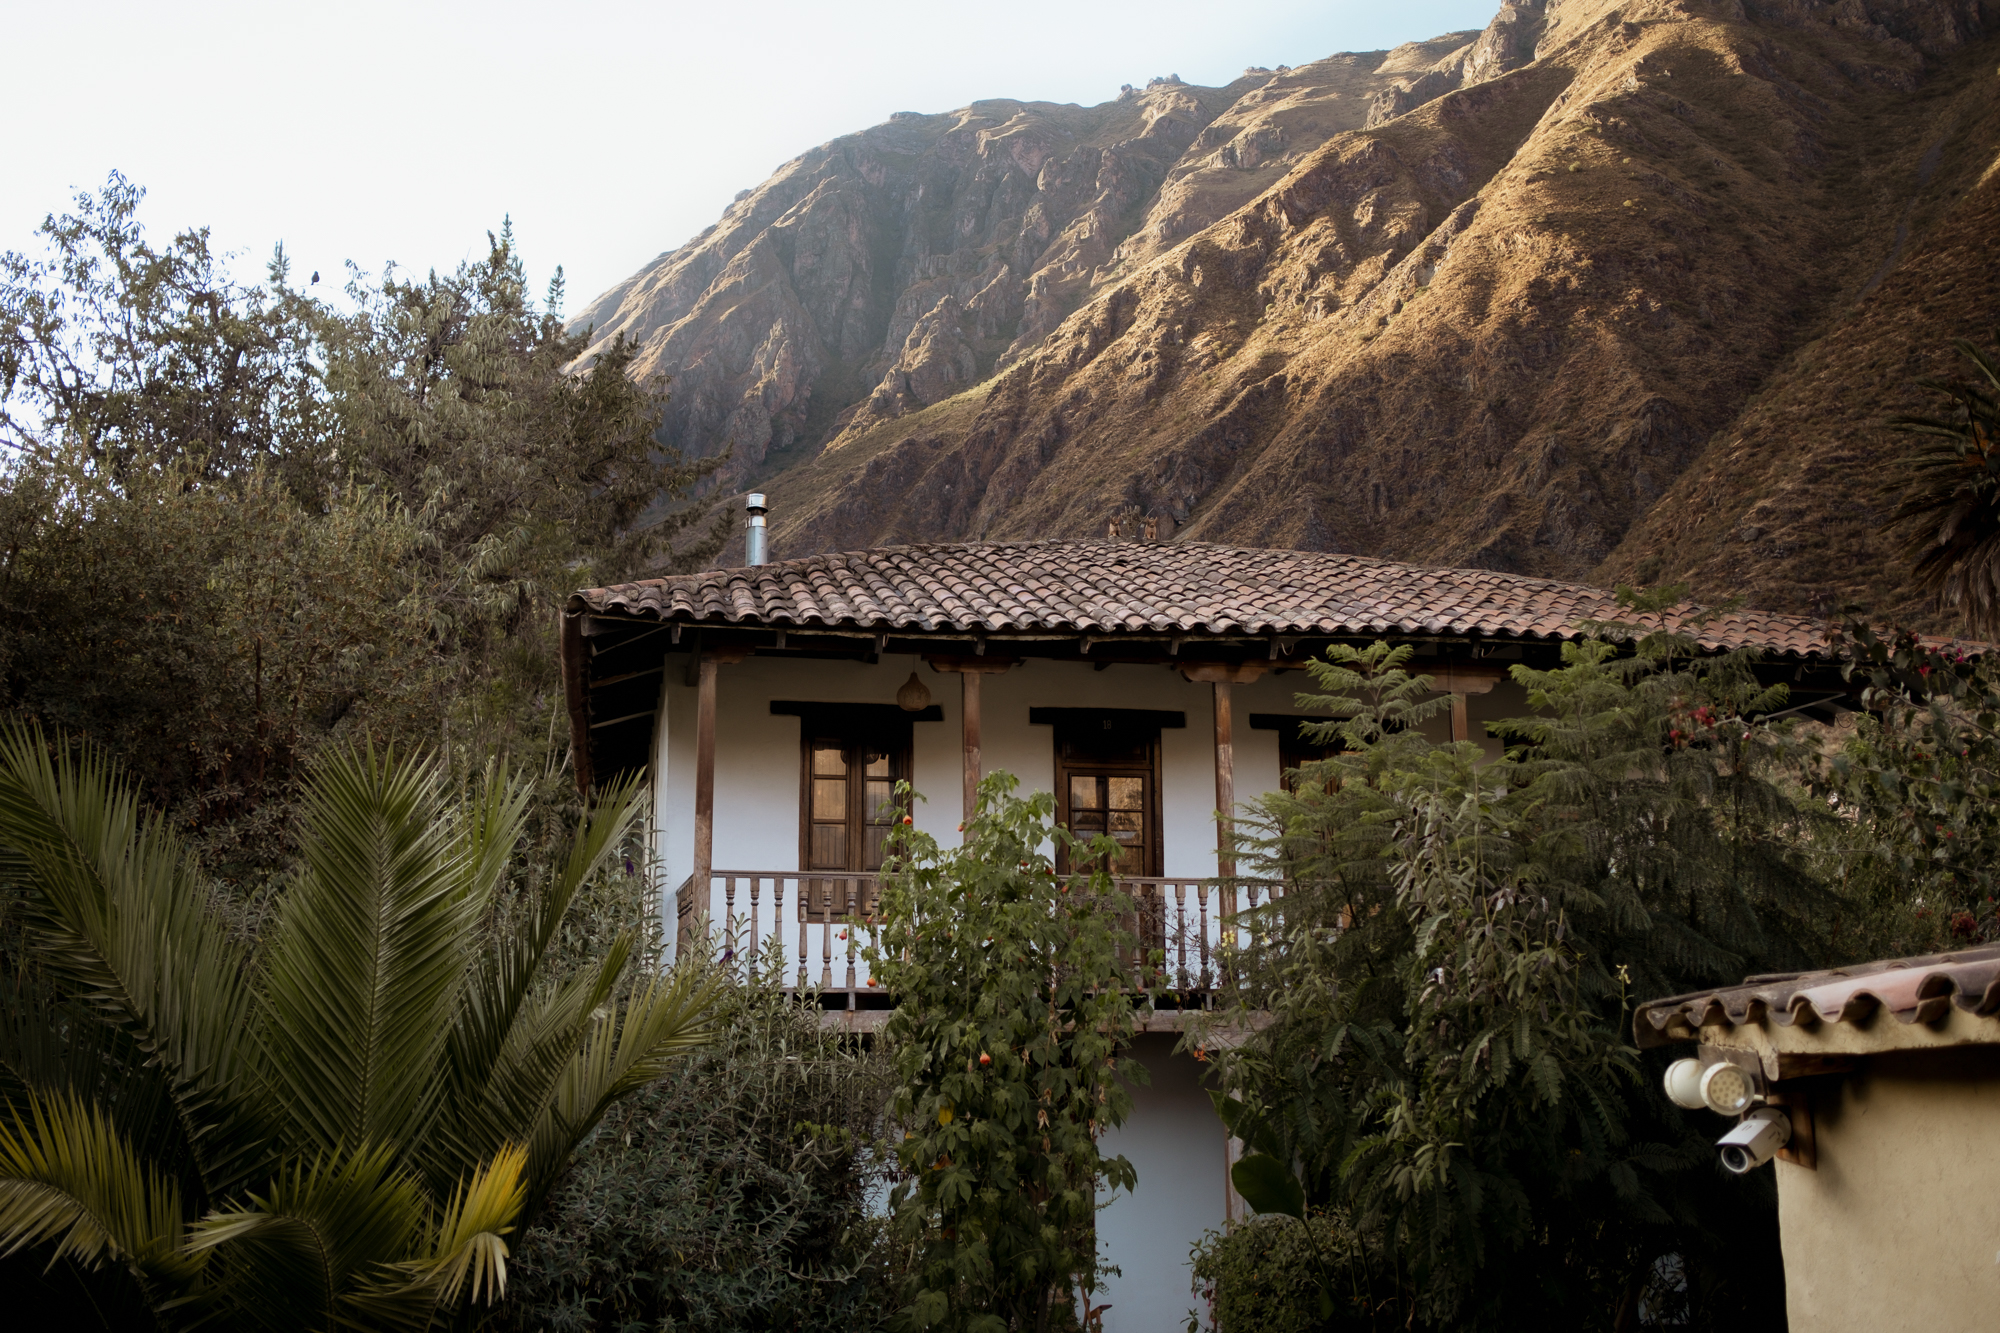 Exterior shot of a luxurious Peruvian hotel in the mountains